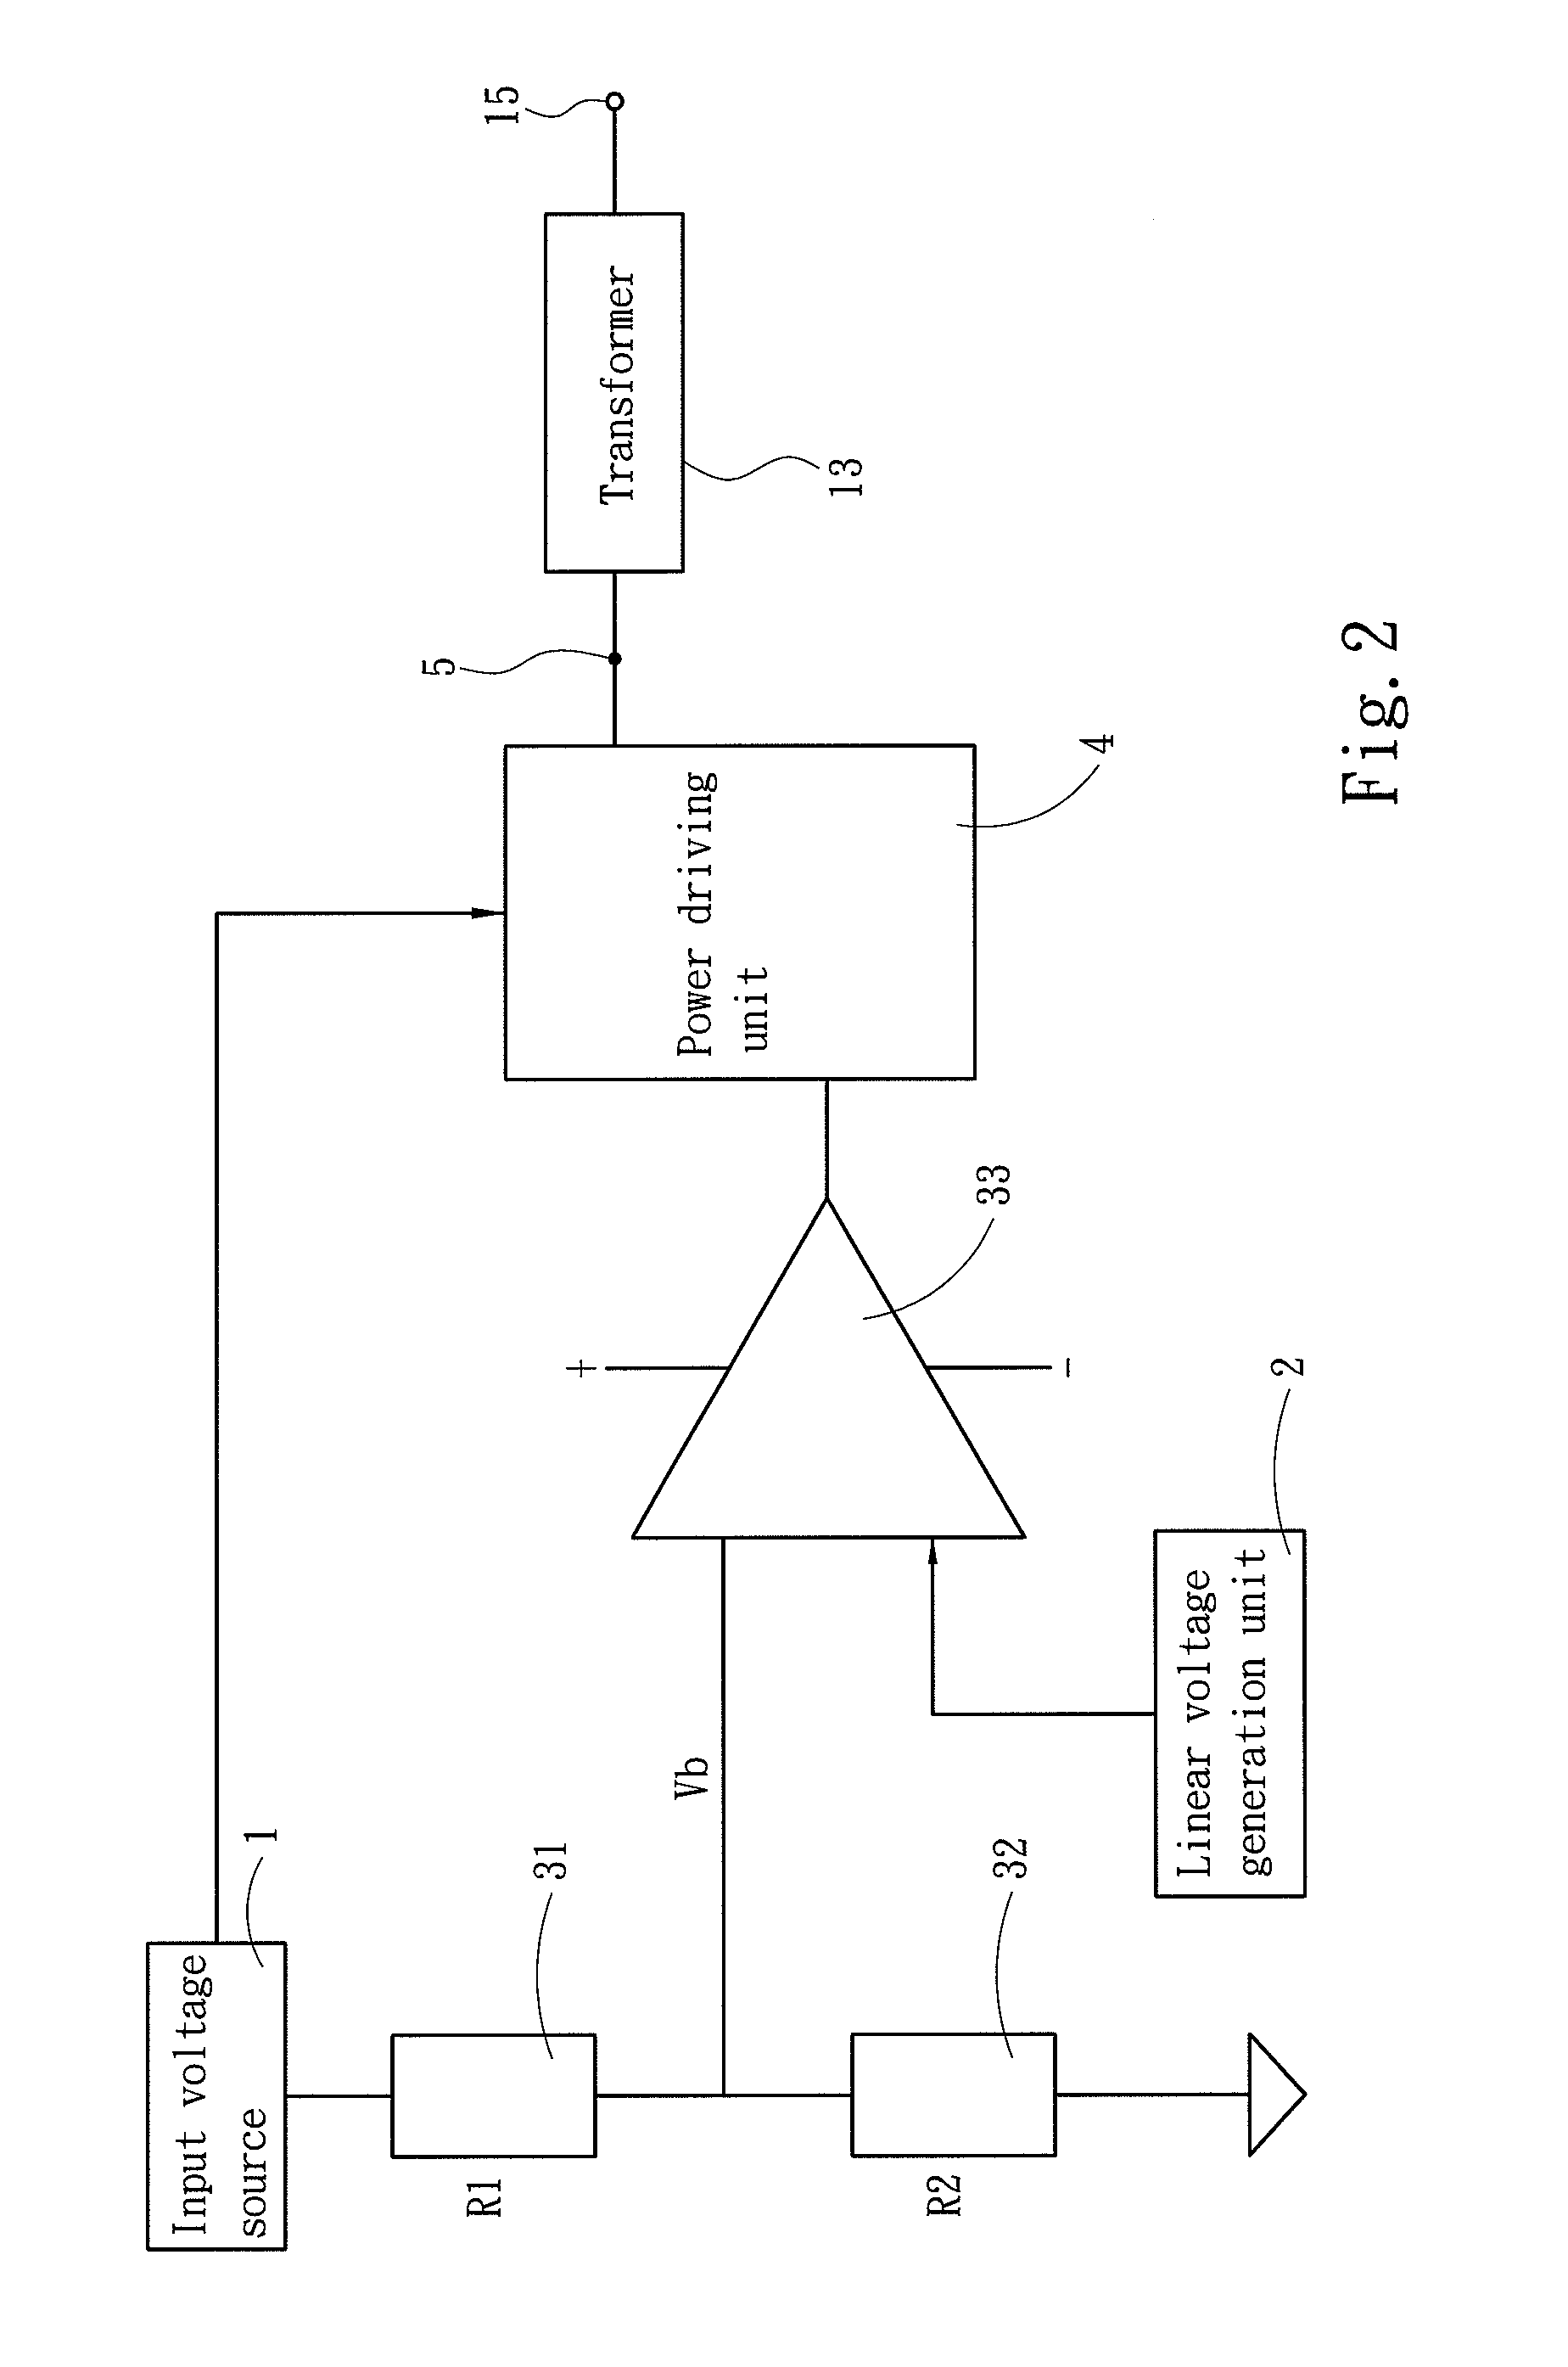 Cycle modulation circuit for limiting peak voltage